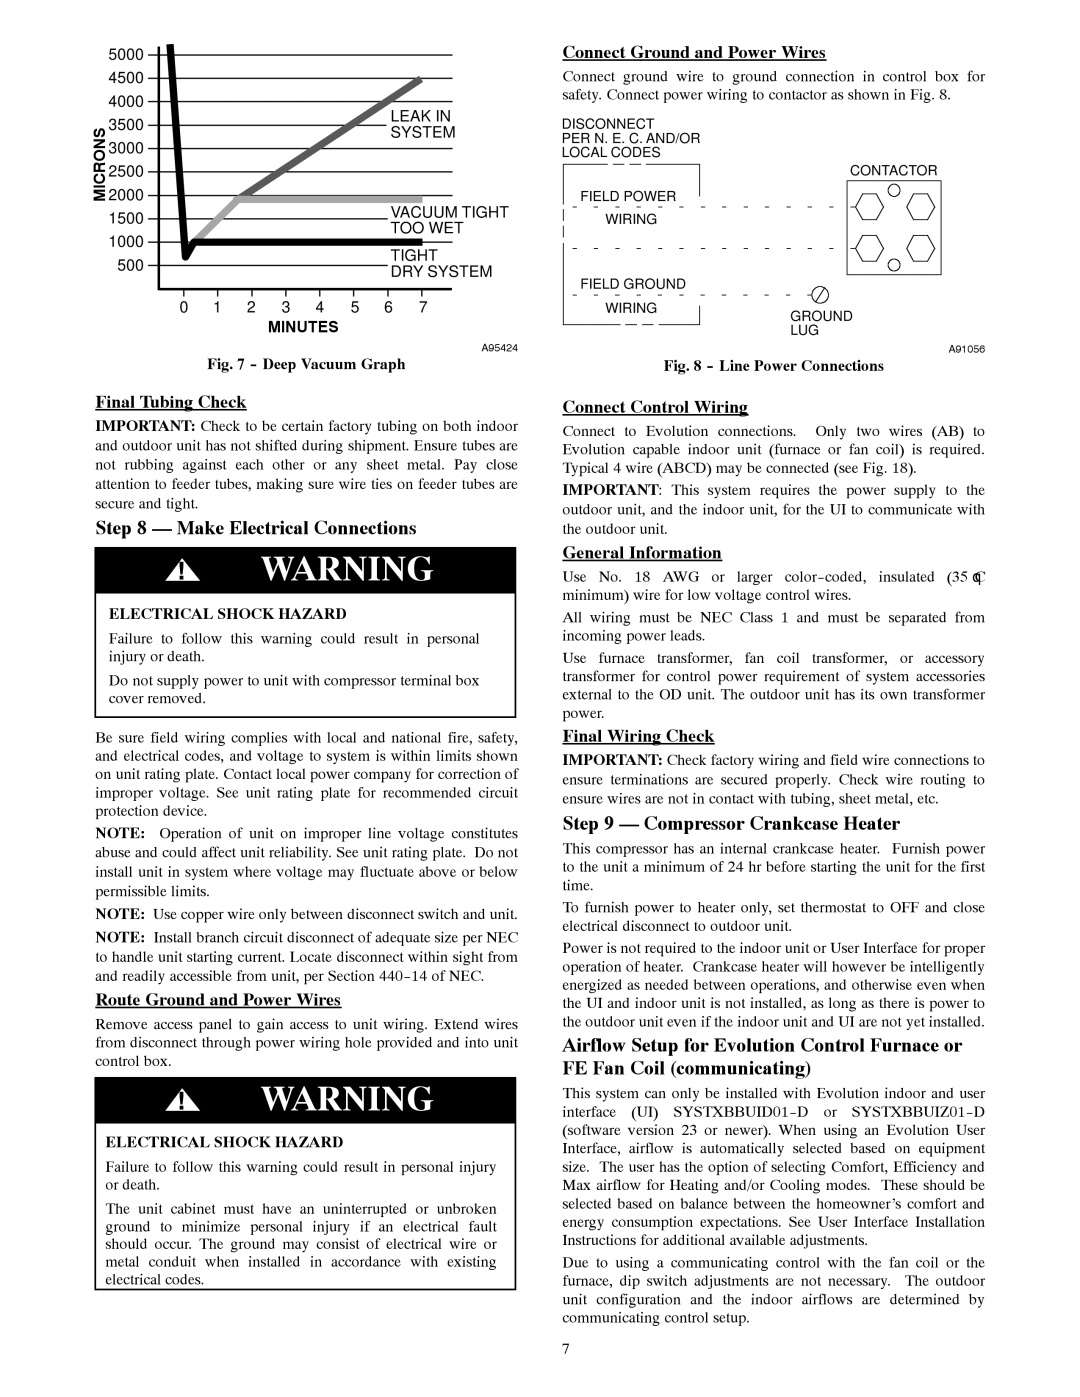 Bryant 280ANV installation instructions Make Electrical Connections, Compressor Crankcase Heater 